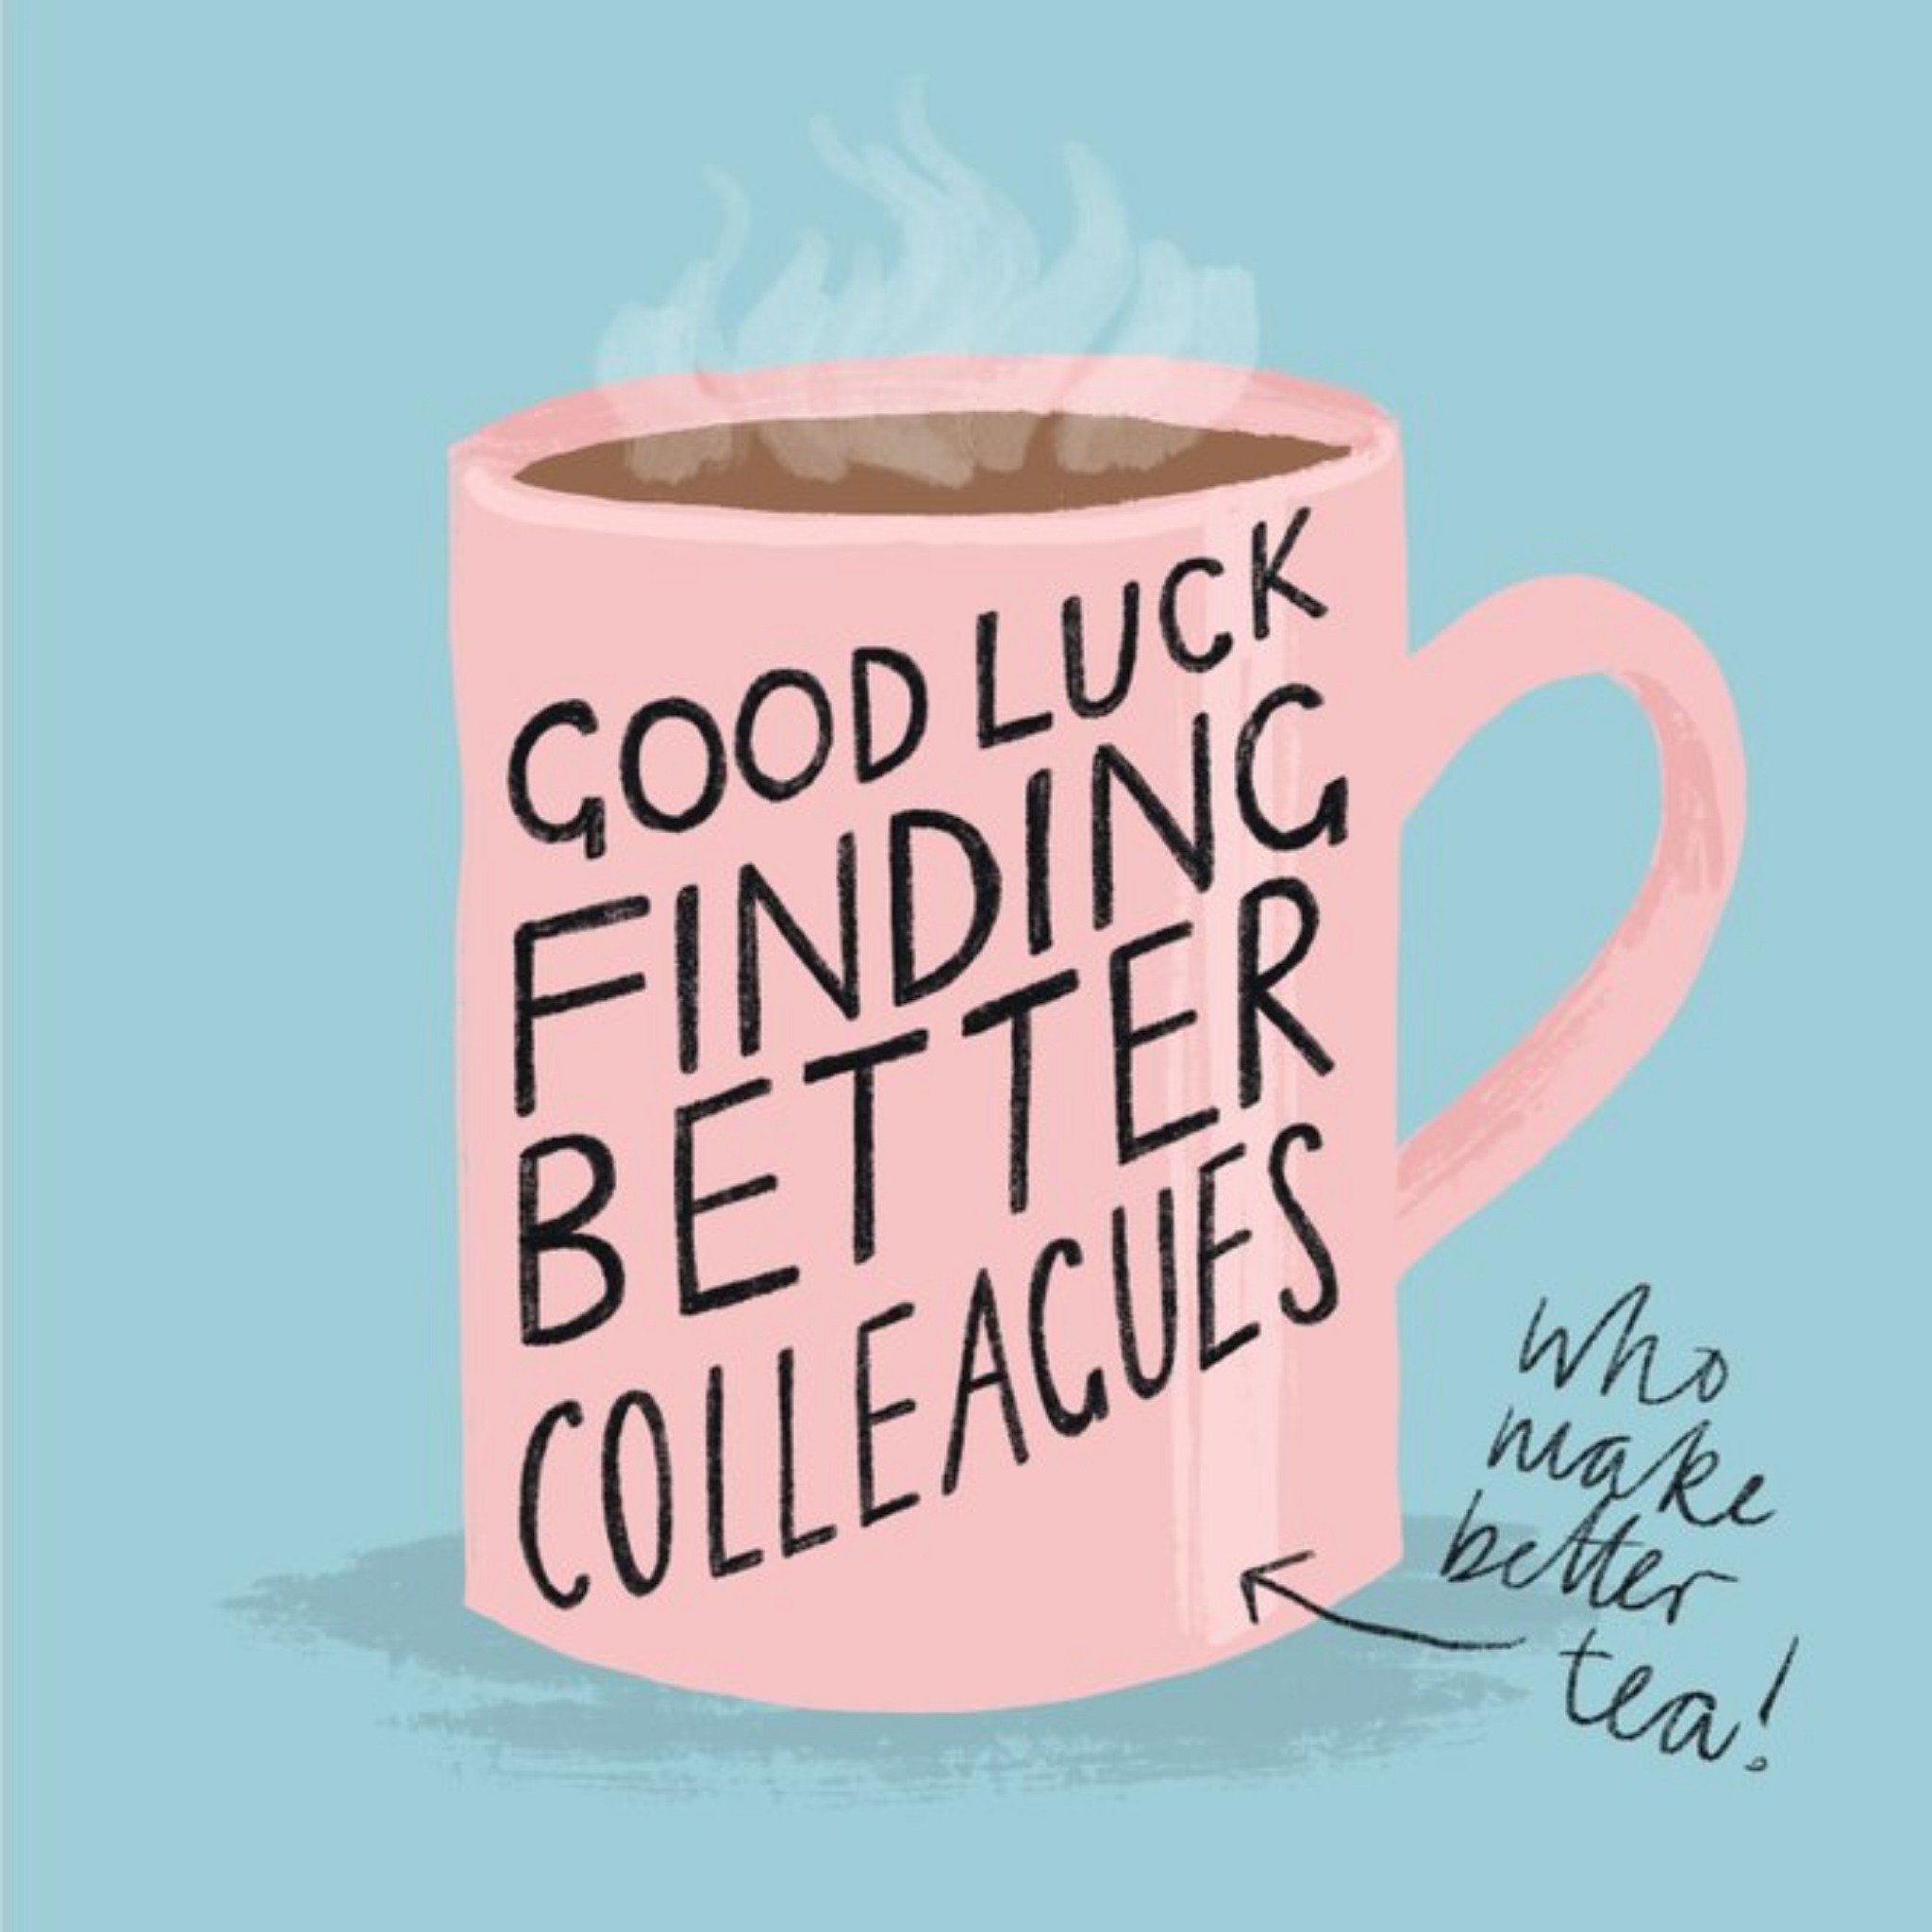 Friends Katy Welsh New Job Good Luck Colleagues Tea Cup Arty Card, Large